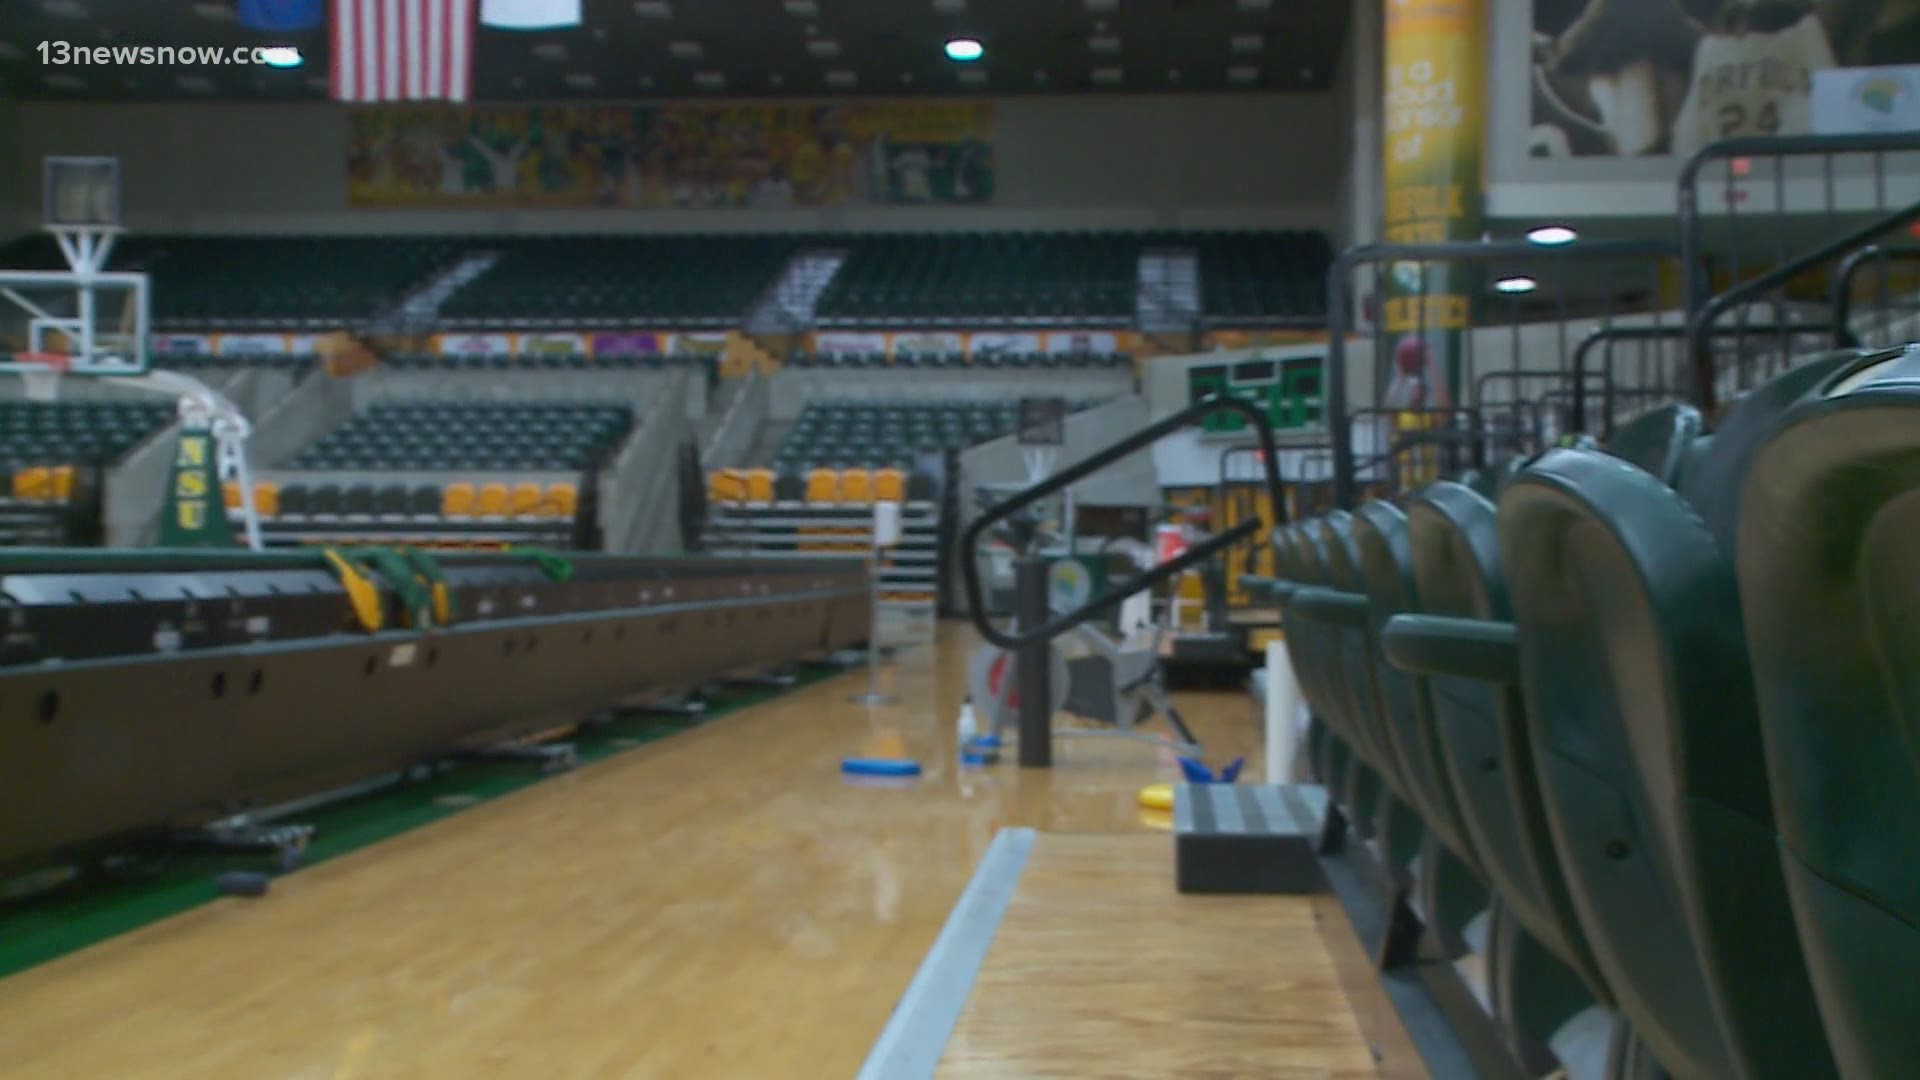 Norfolk State Spartans are having a season without spectators because of the coronavirus pandemic.